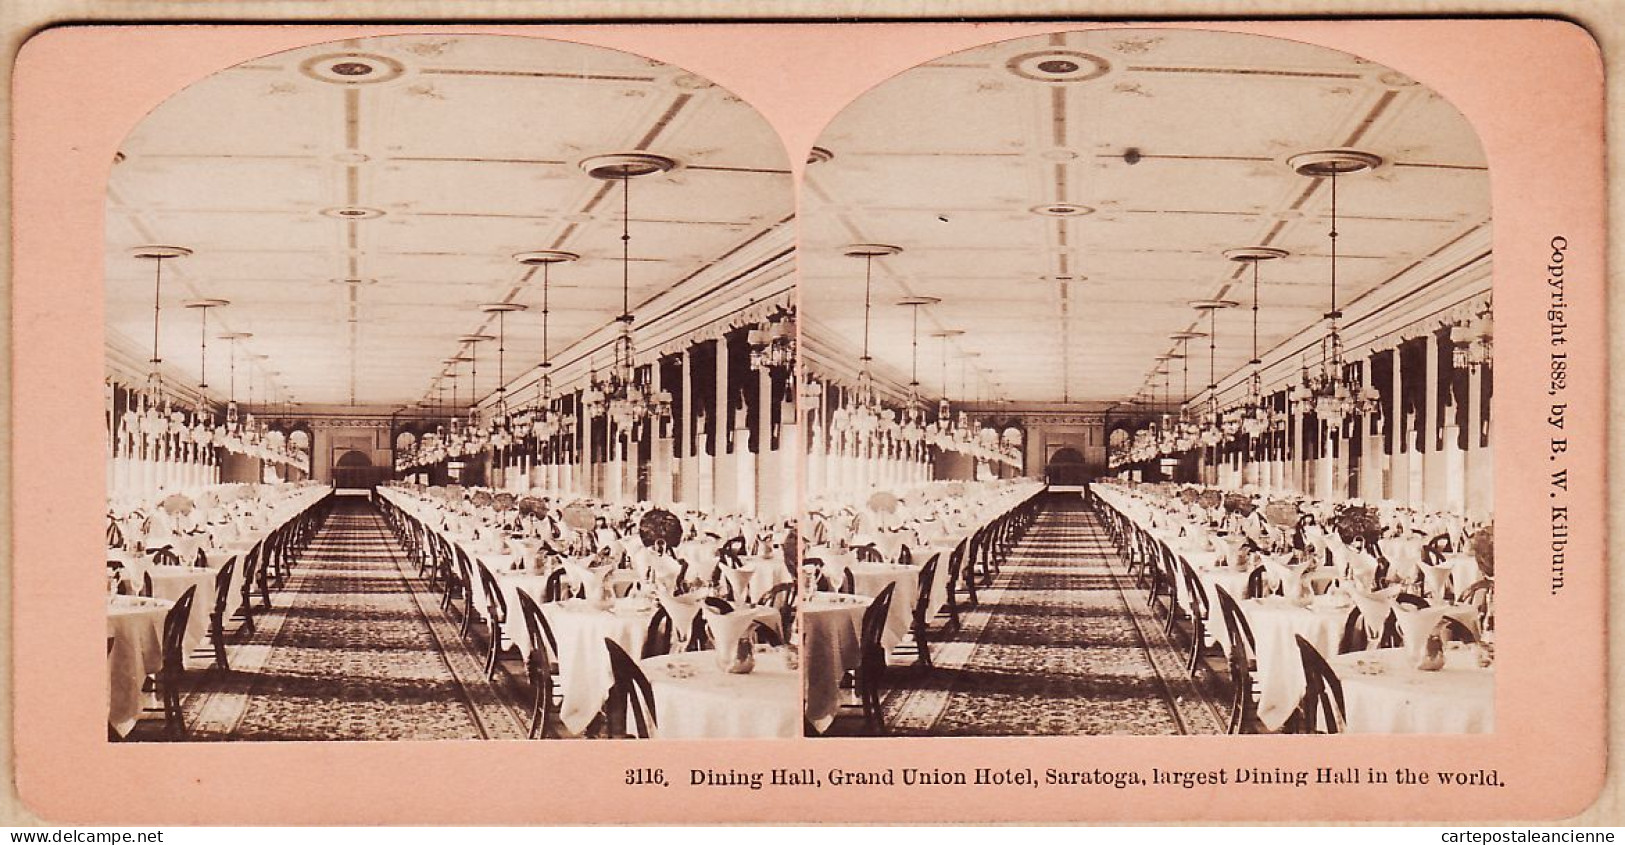 04585 / U.S.A KILBURN 1882 SARATOGA HOTEL GRAND UNION Dining Hall Largest Dining Hall In The World Photo Stereoview 3116 - Stereoscopic